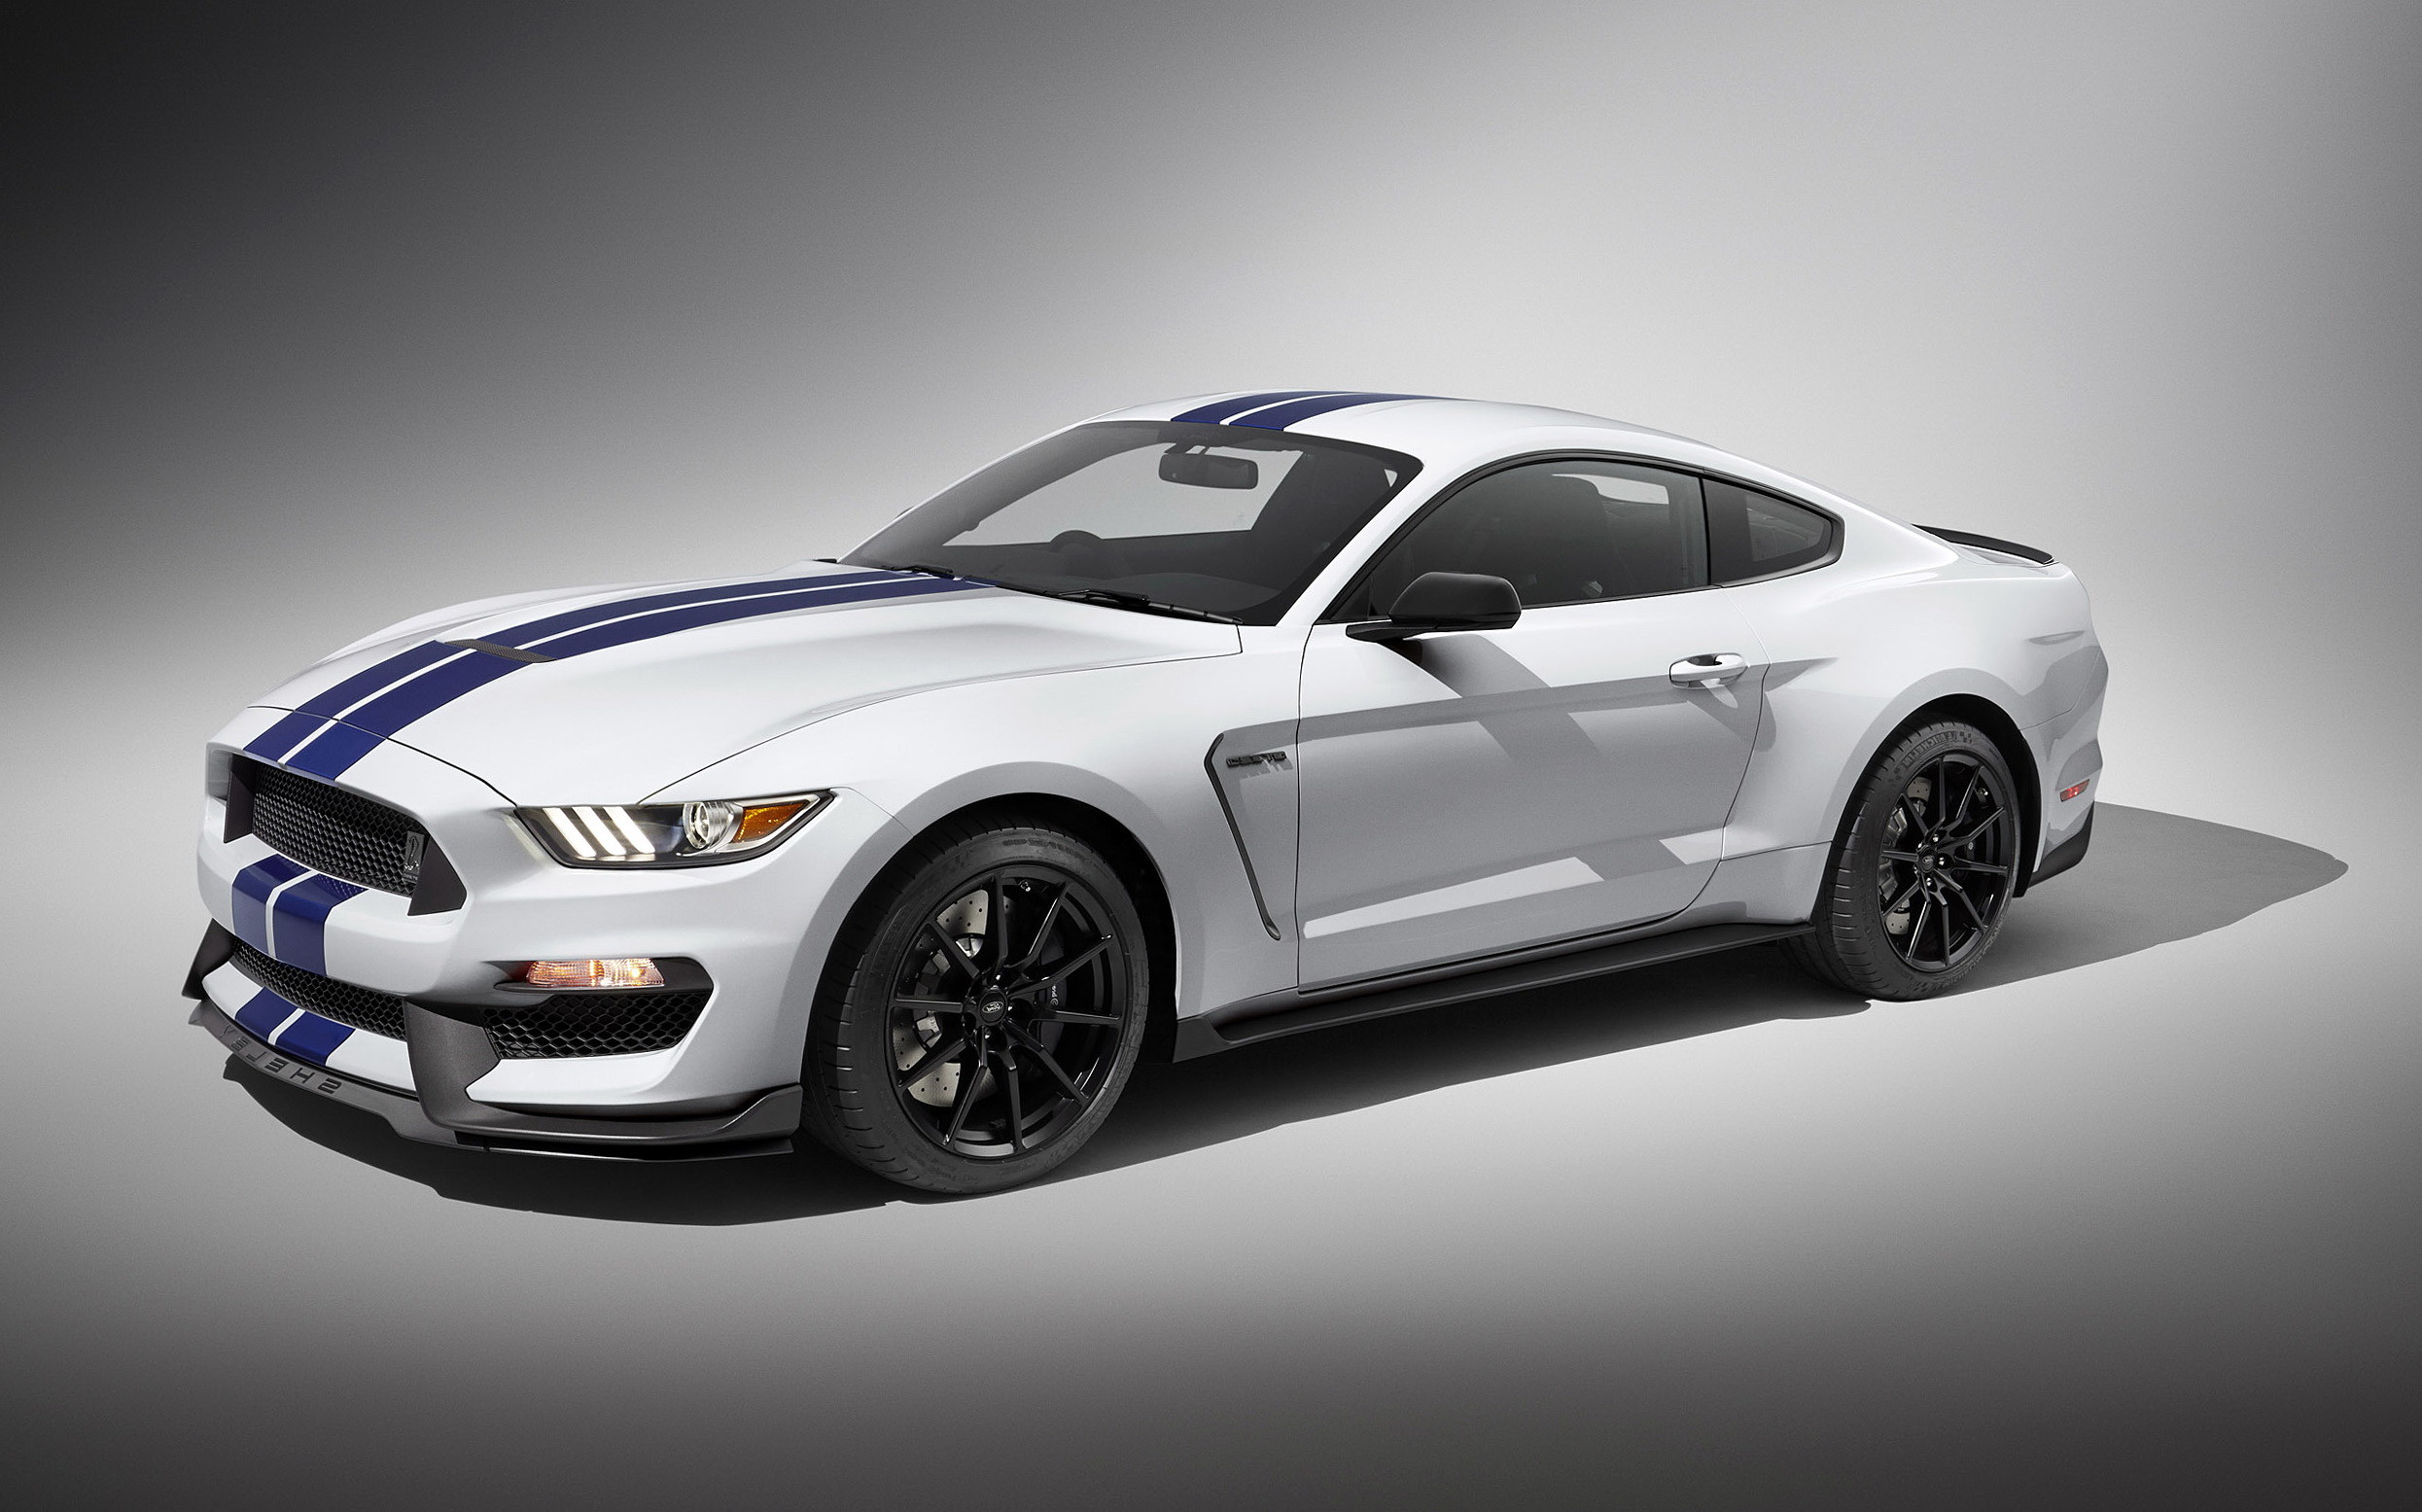 2016 Ford Mustang Shelby Gt350 Wallpaper Automotive Designs